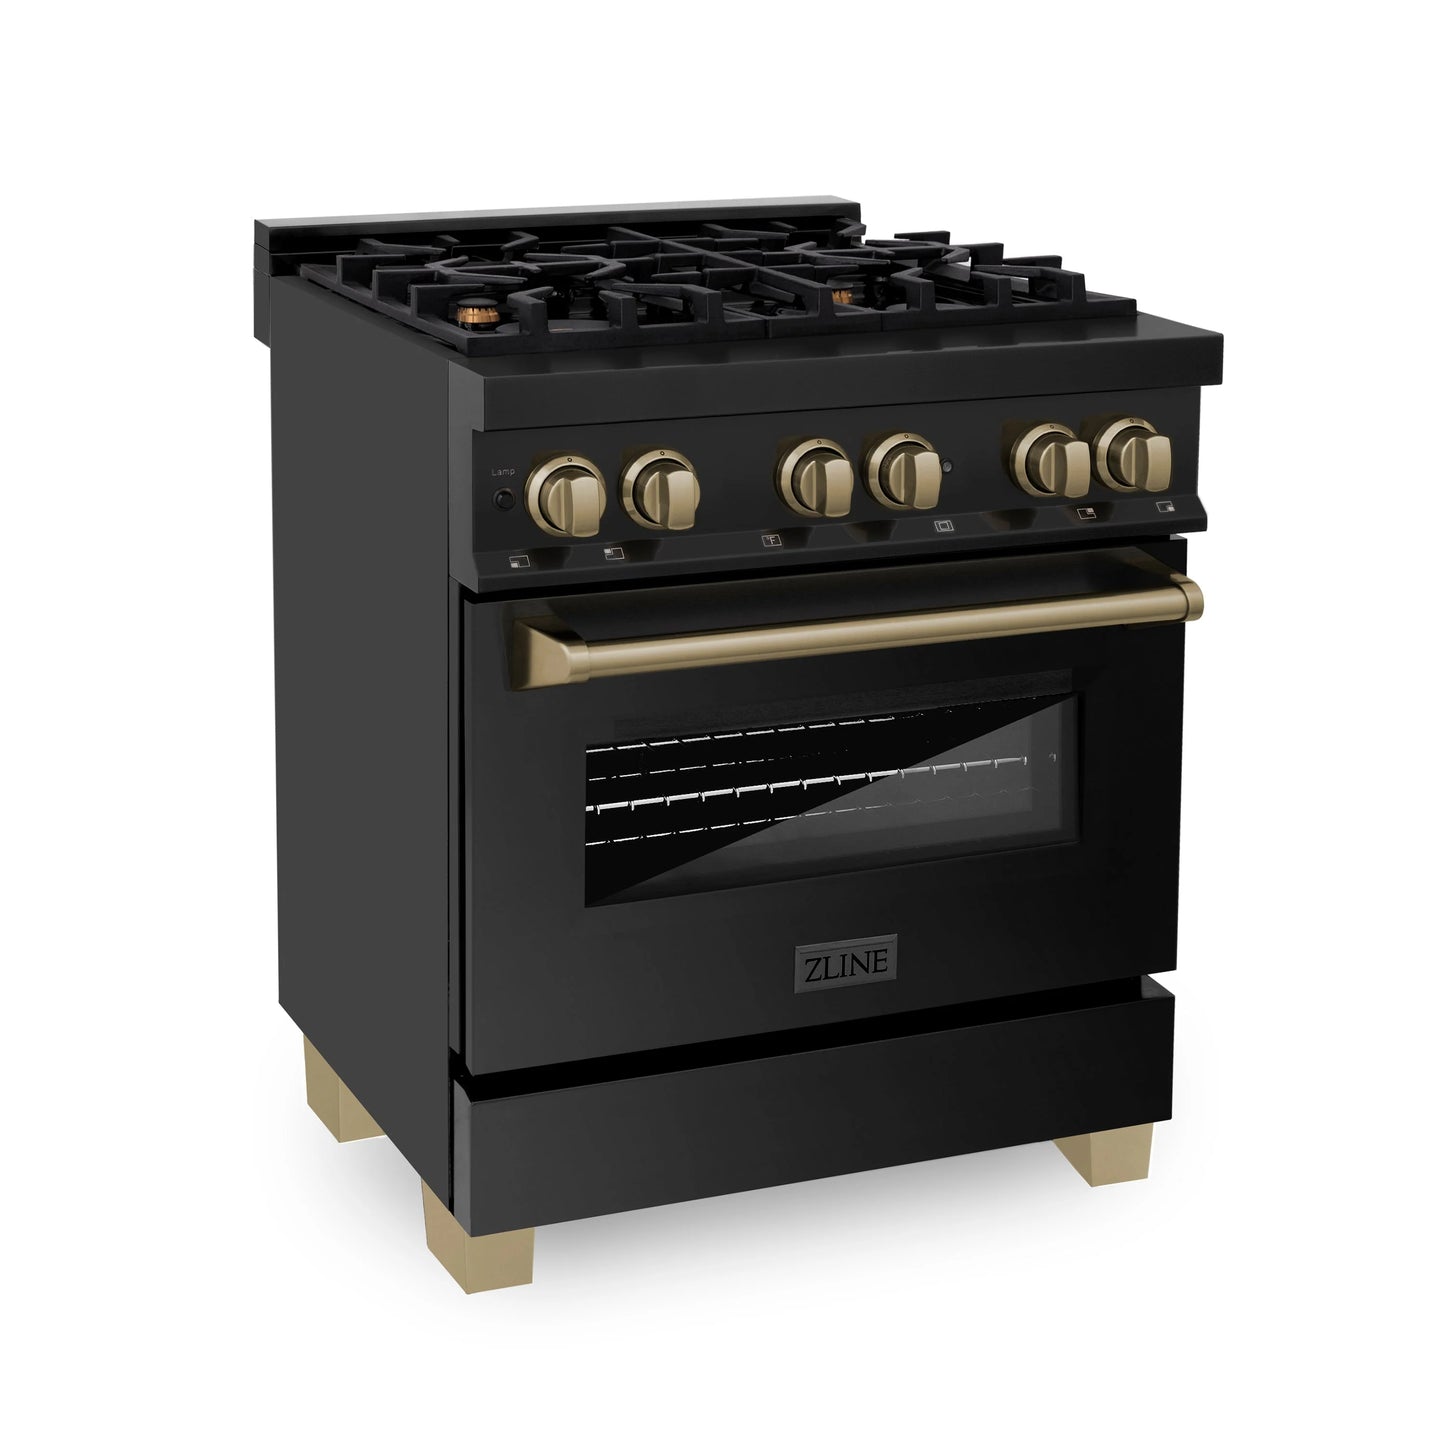 ZLINE Autograph Edition 30 in. Dual Fuel Range with Gas Stove and Electric Oven in Black Stainless Steel with Champagne Bronze Accents (RABZ-30-CB)